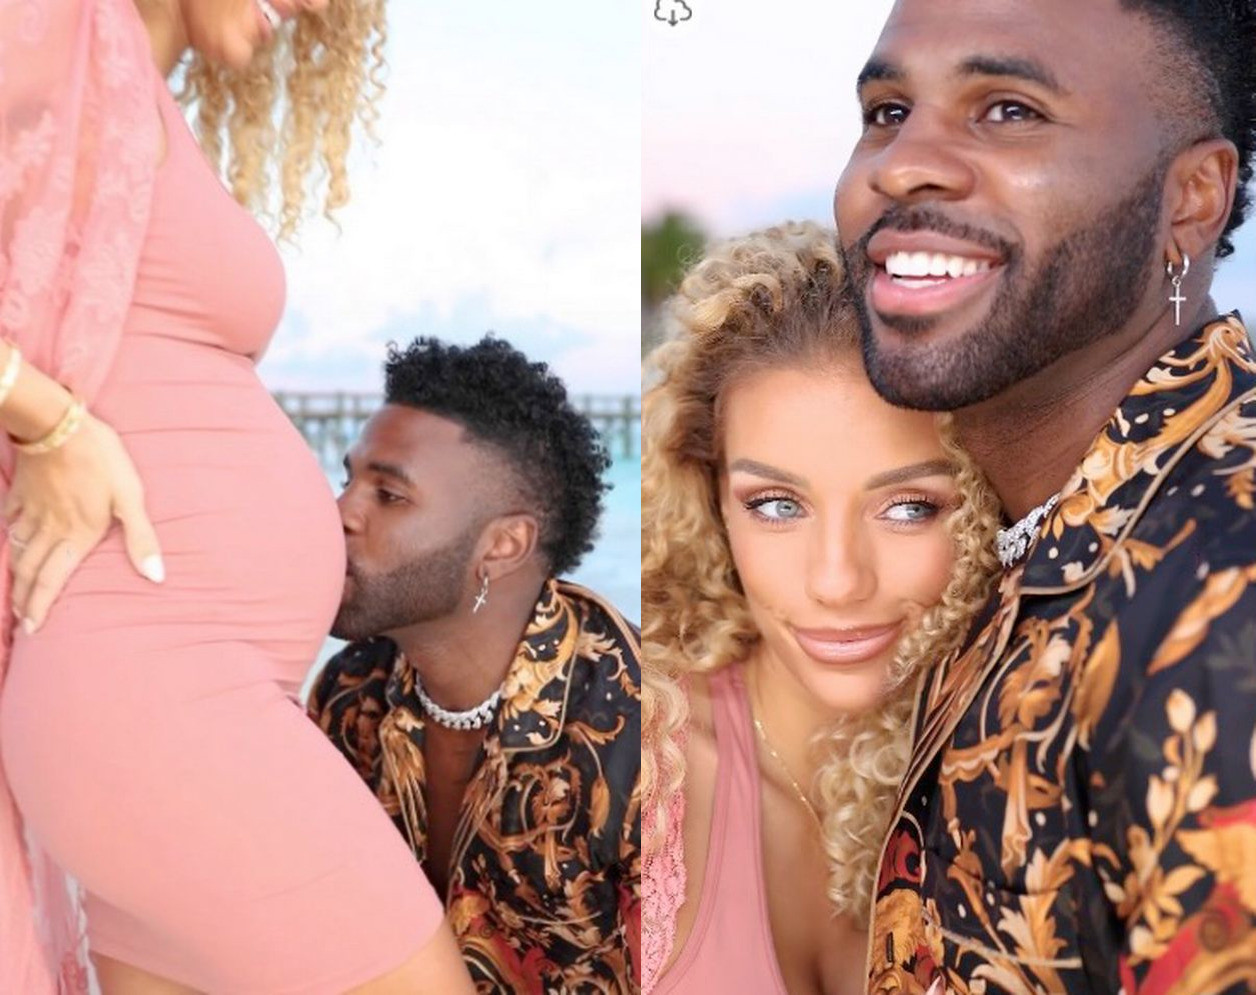 Jason Derulo and girlfriend Jena Frumes expecting their first child together